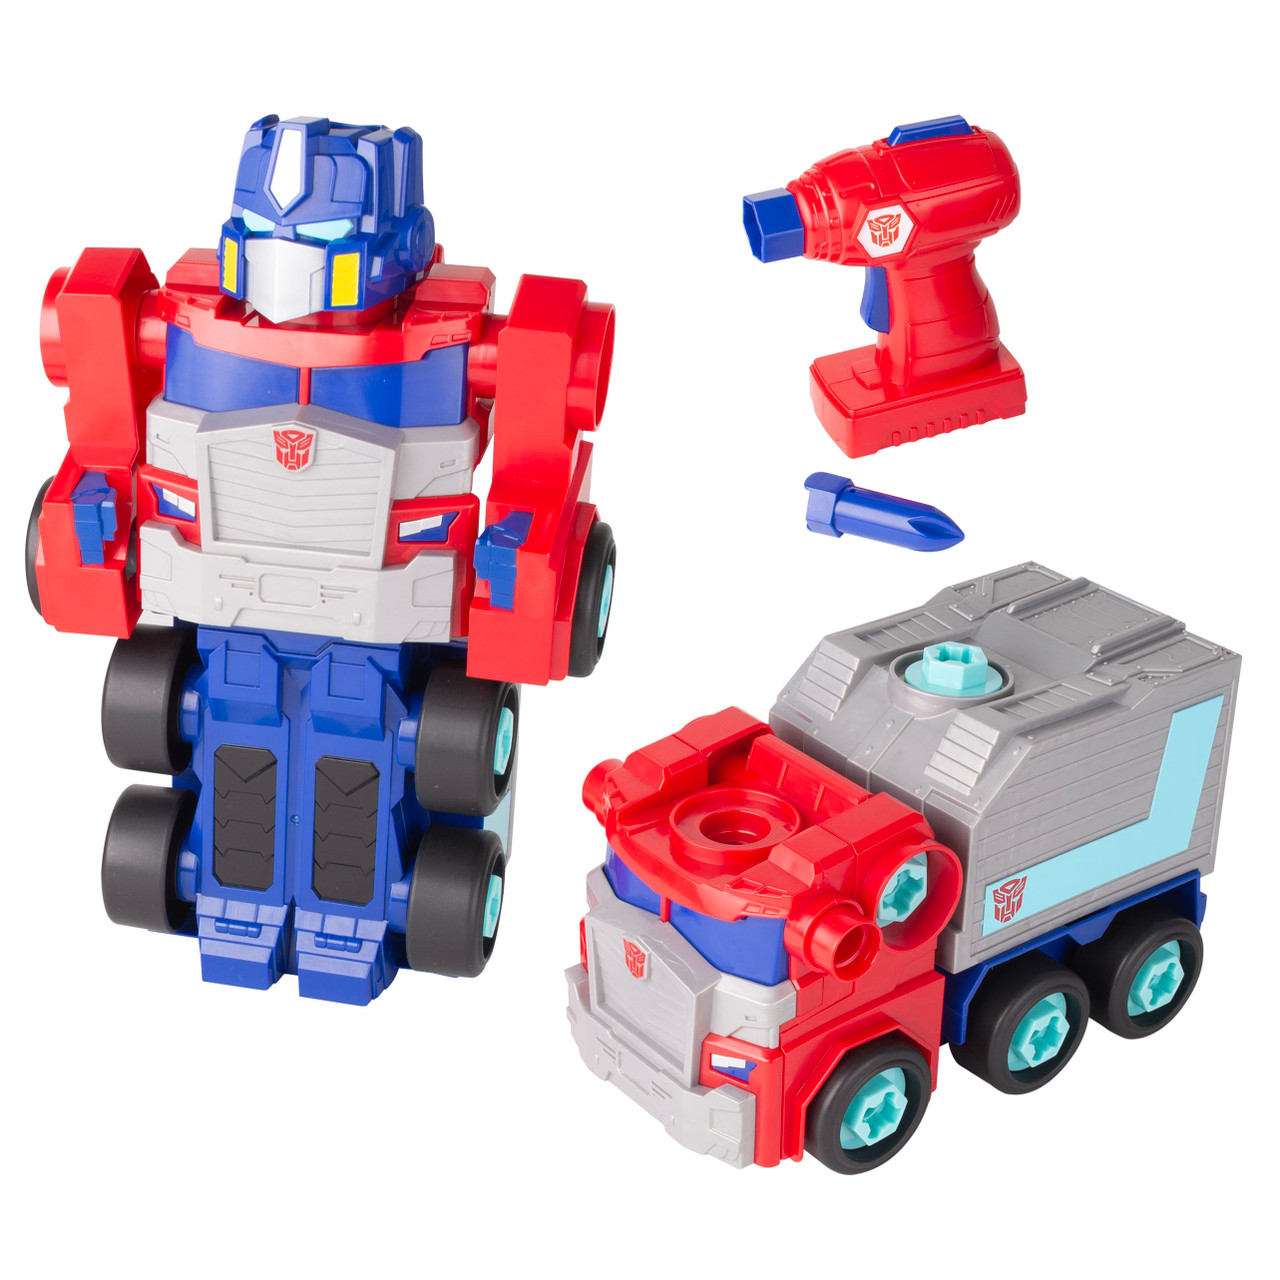 Transformers Build-A-Buddy™ Optimus Prime Toy with Drill